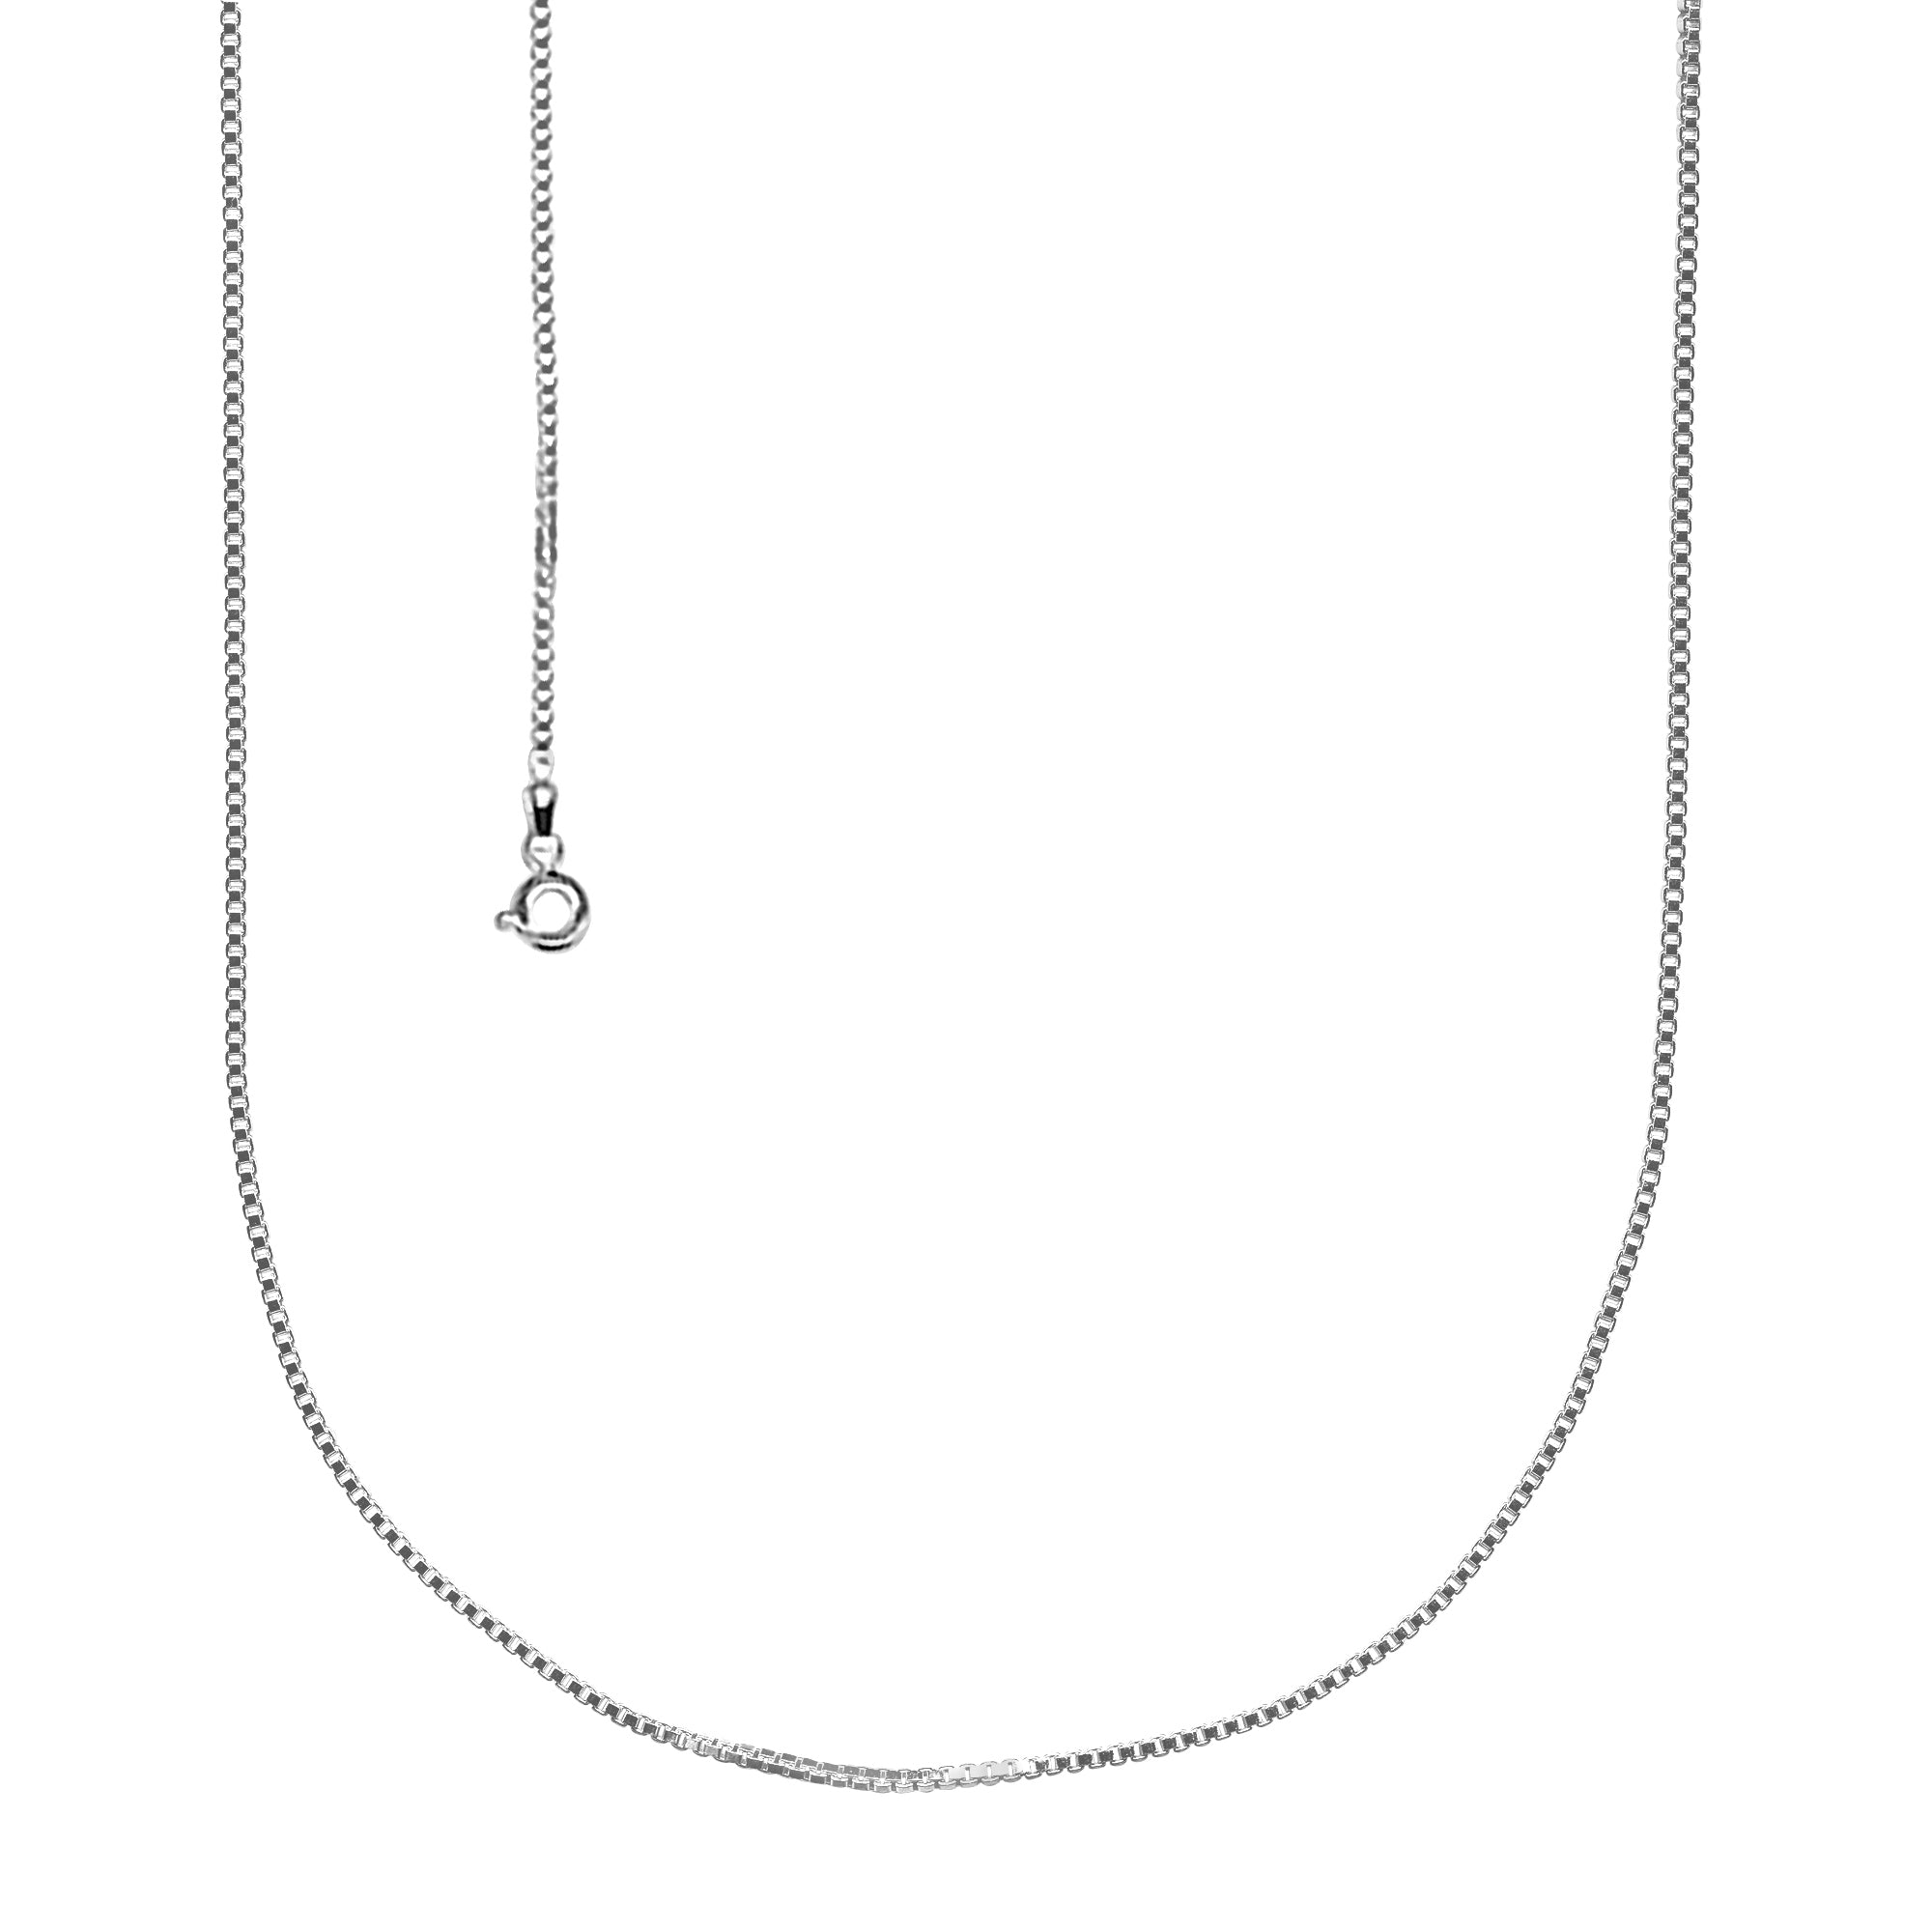 Box Chain in Sterling Silver (20inches x 1.5mm wide)